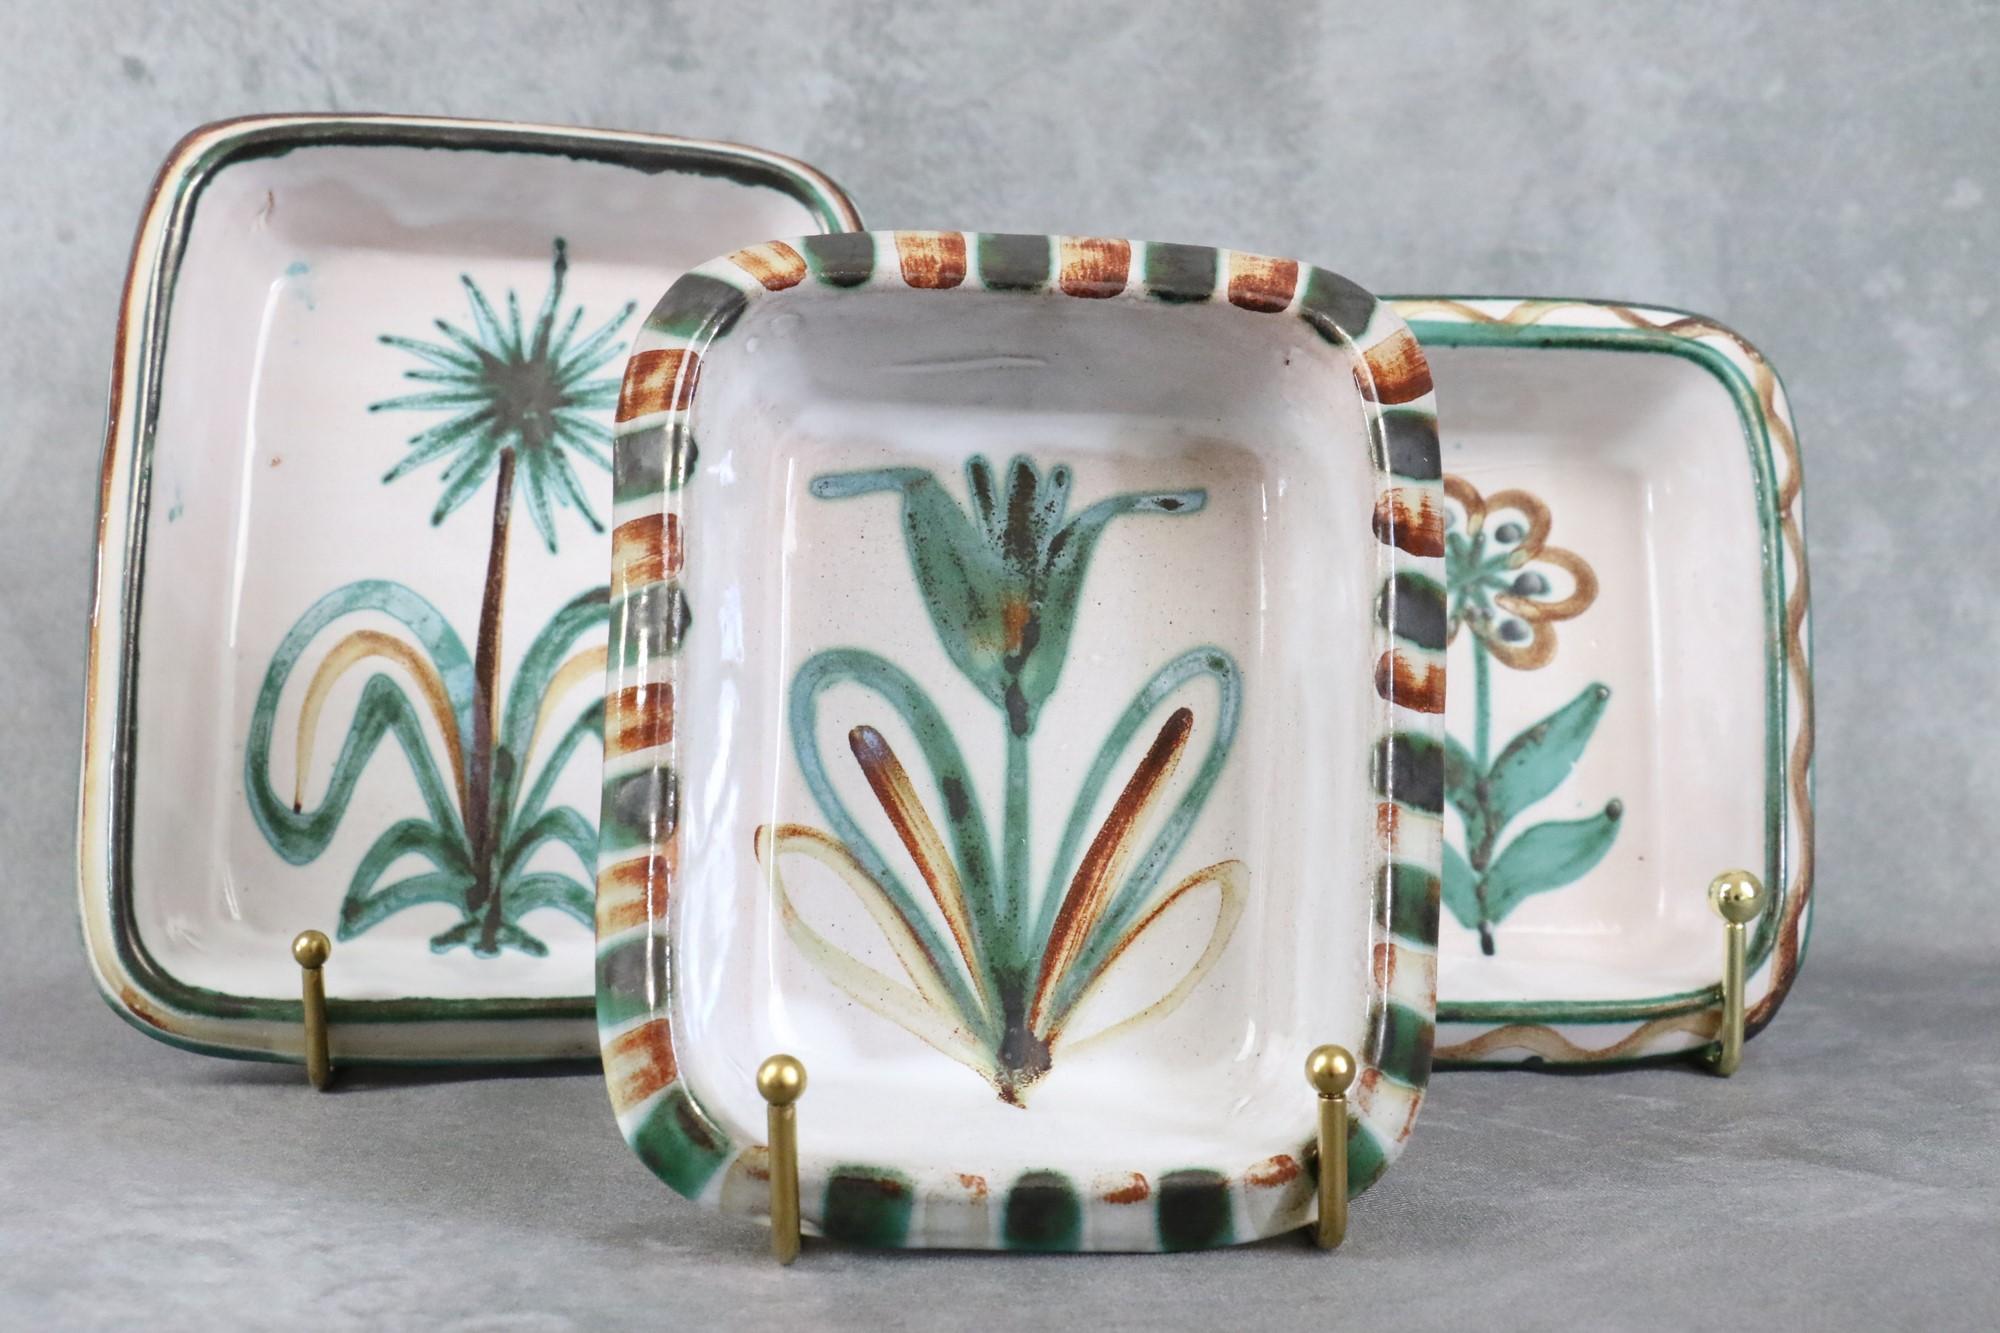 Set of 3 Ceramic Dishes by Robert Picault, Vallauris, French Ceramic, 1950's For Sale 2